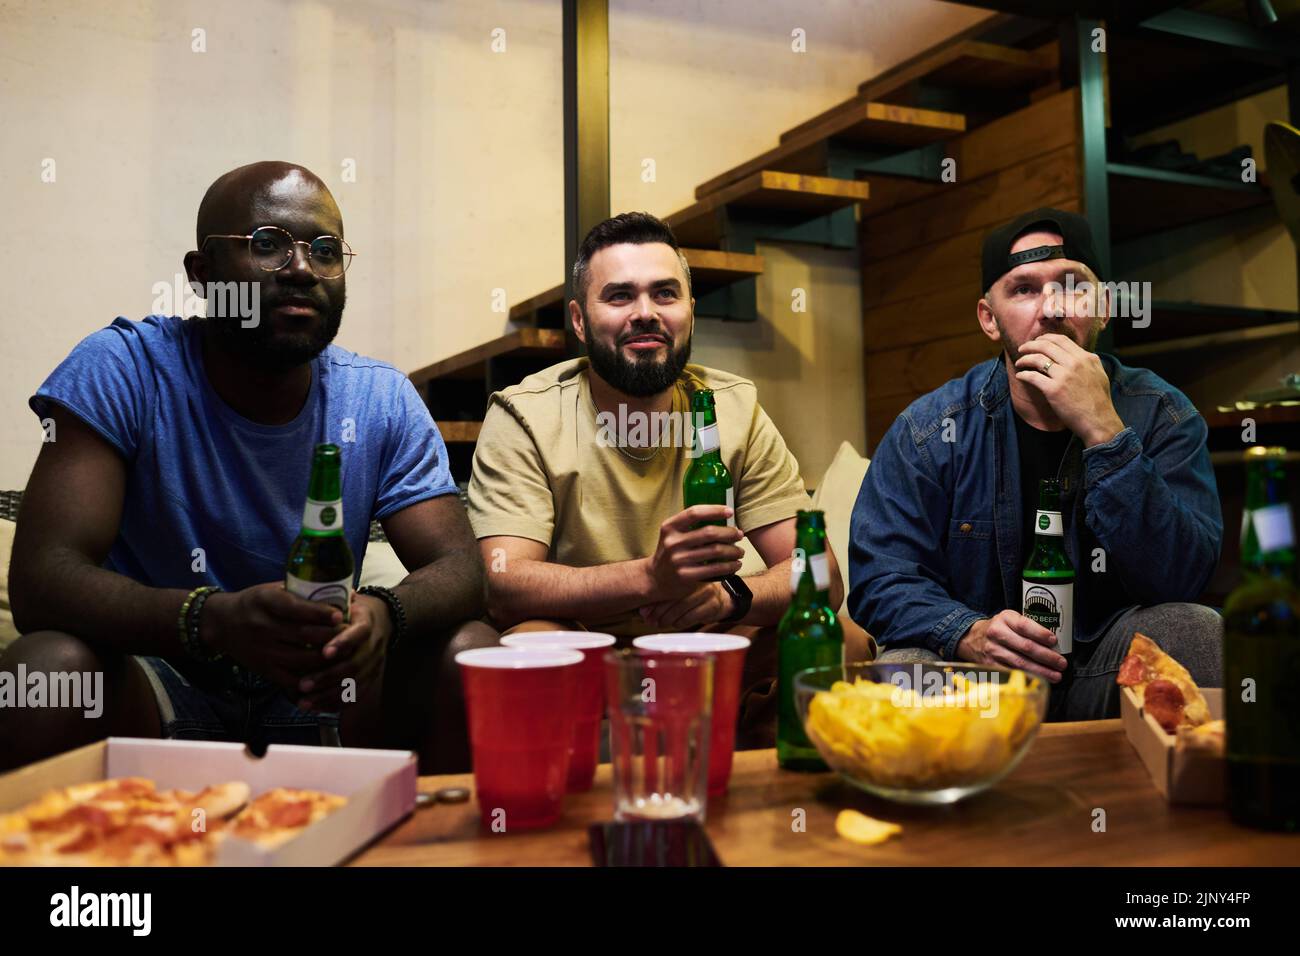 Three intercultural male football fans gathered by table with beer and snack in front of tv set in garage to watch broadcast of match Stock Photo